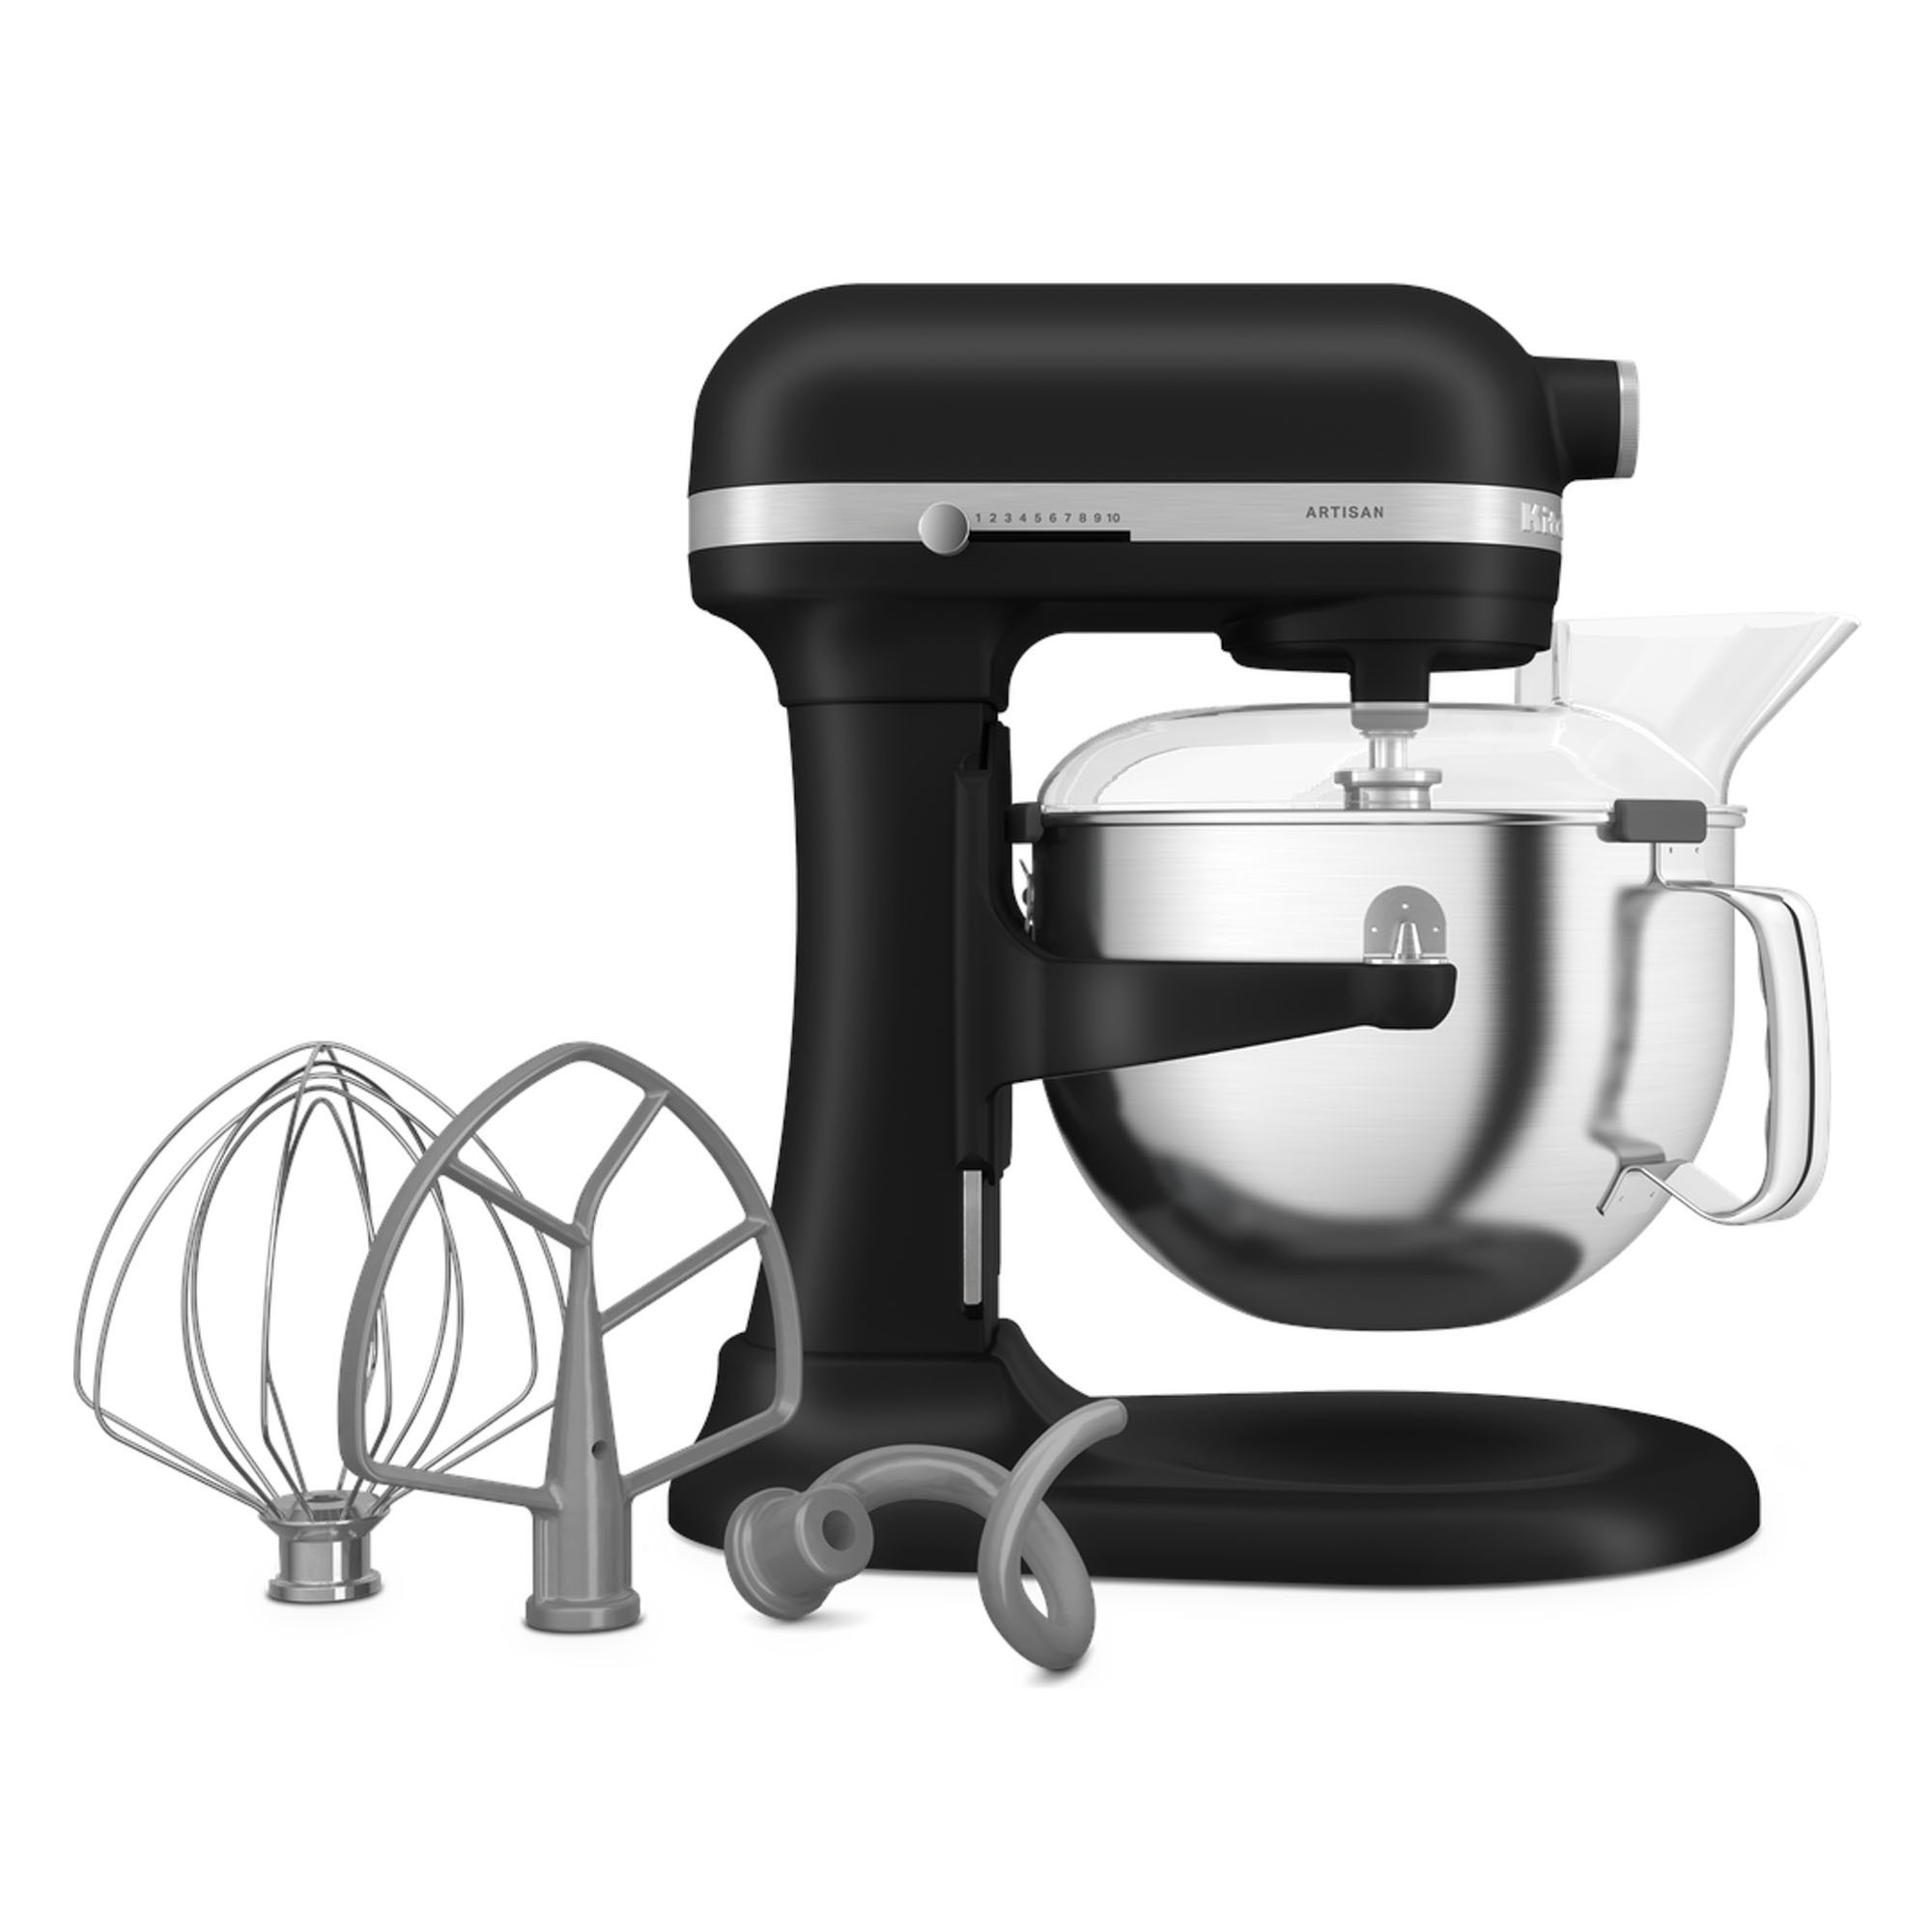 Stand mixer with bowl, 4.3L, with slicer accessory, Classic, Matte White -  KitchenAid